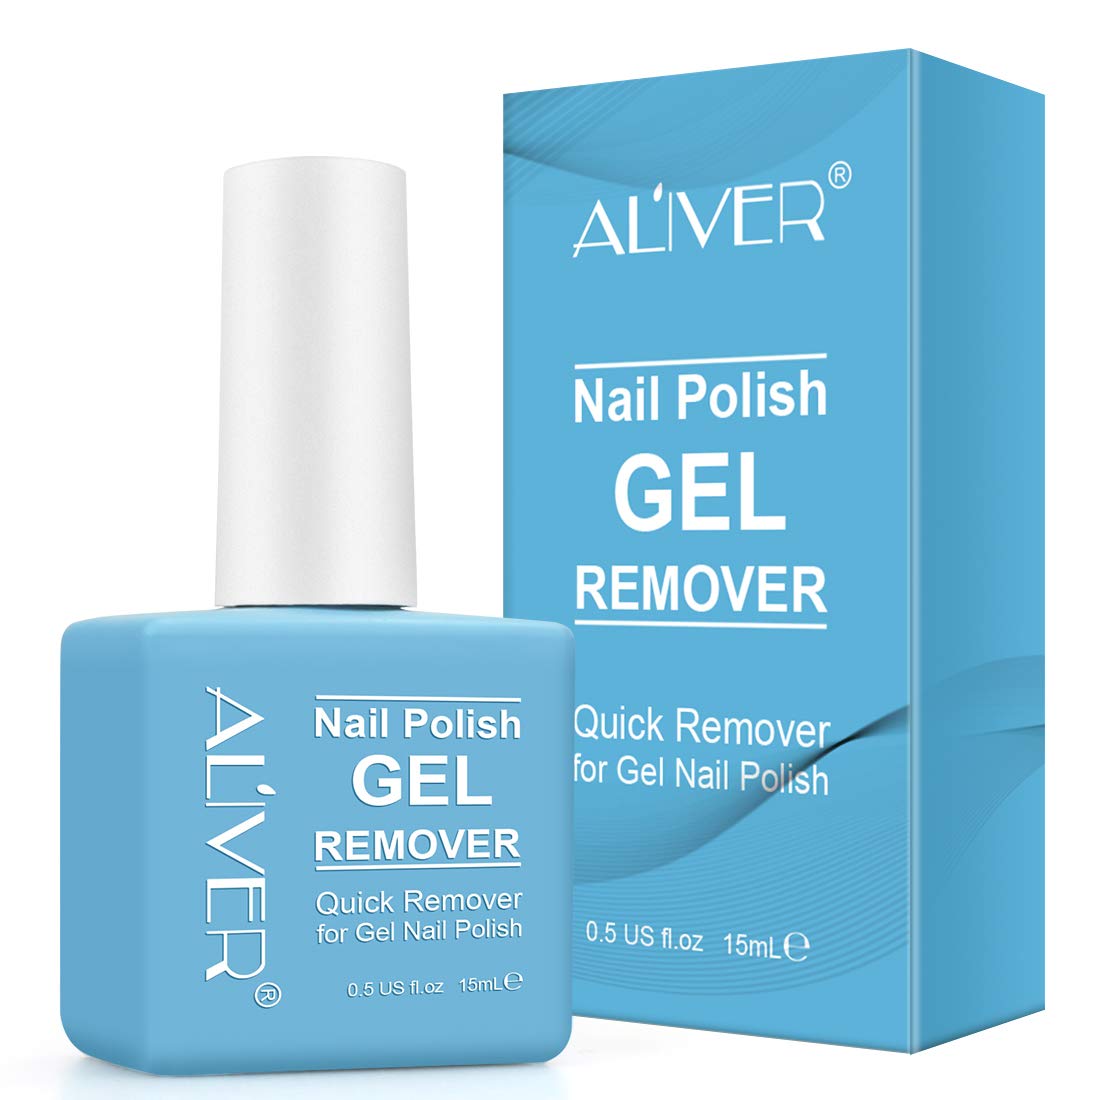 Aliver Gel Nail Polish Remover for Nails in 3-5 Minutes, Easily & Quickly Remove Gel, No Need for Foil, Soaking or Wrapping, Protect Yo